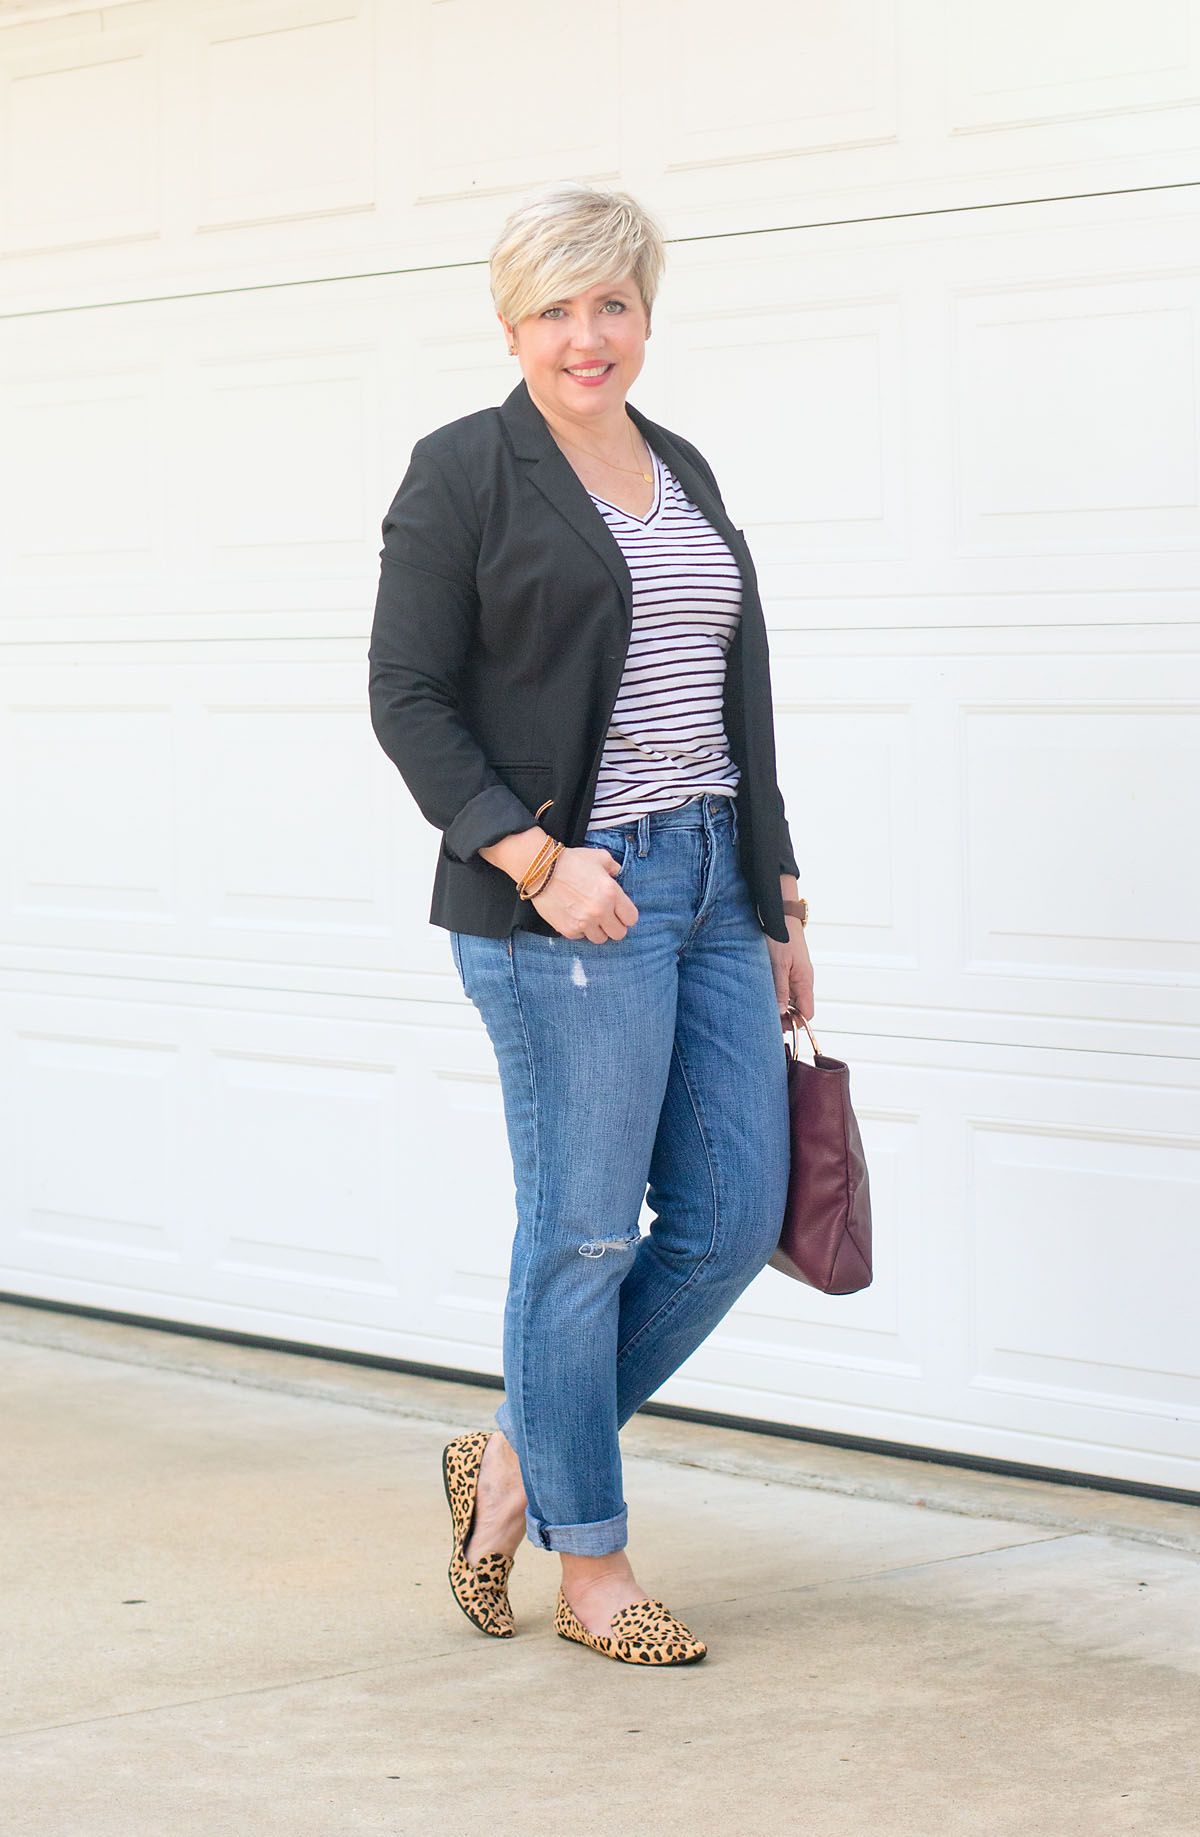 Woman posing in front of a garage door wearing a black blazer, black and white stripe shirt, jeans, and leopard flats while holding brown purse